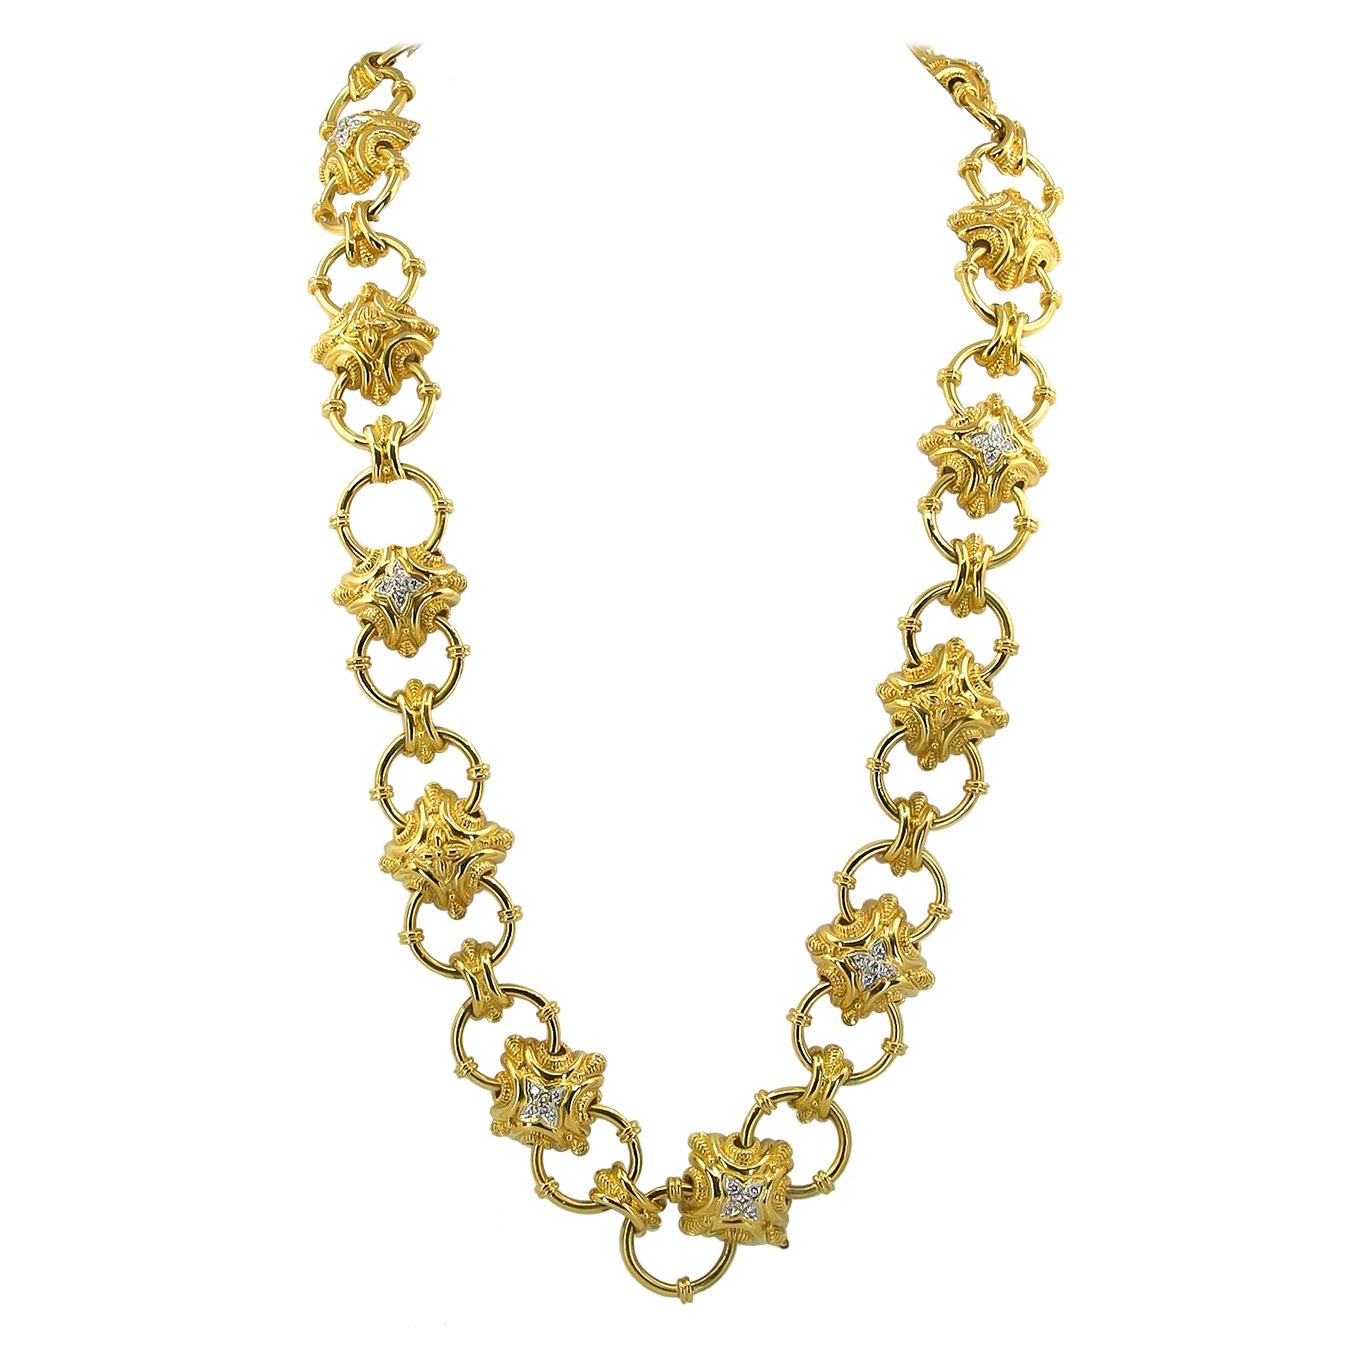 Doorknocker Diamond Yellow and White Gold Link Convertible Necklace Belt